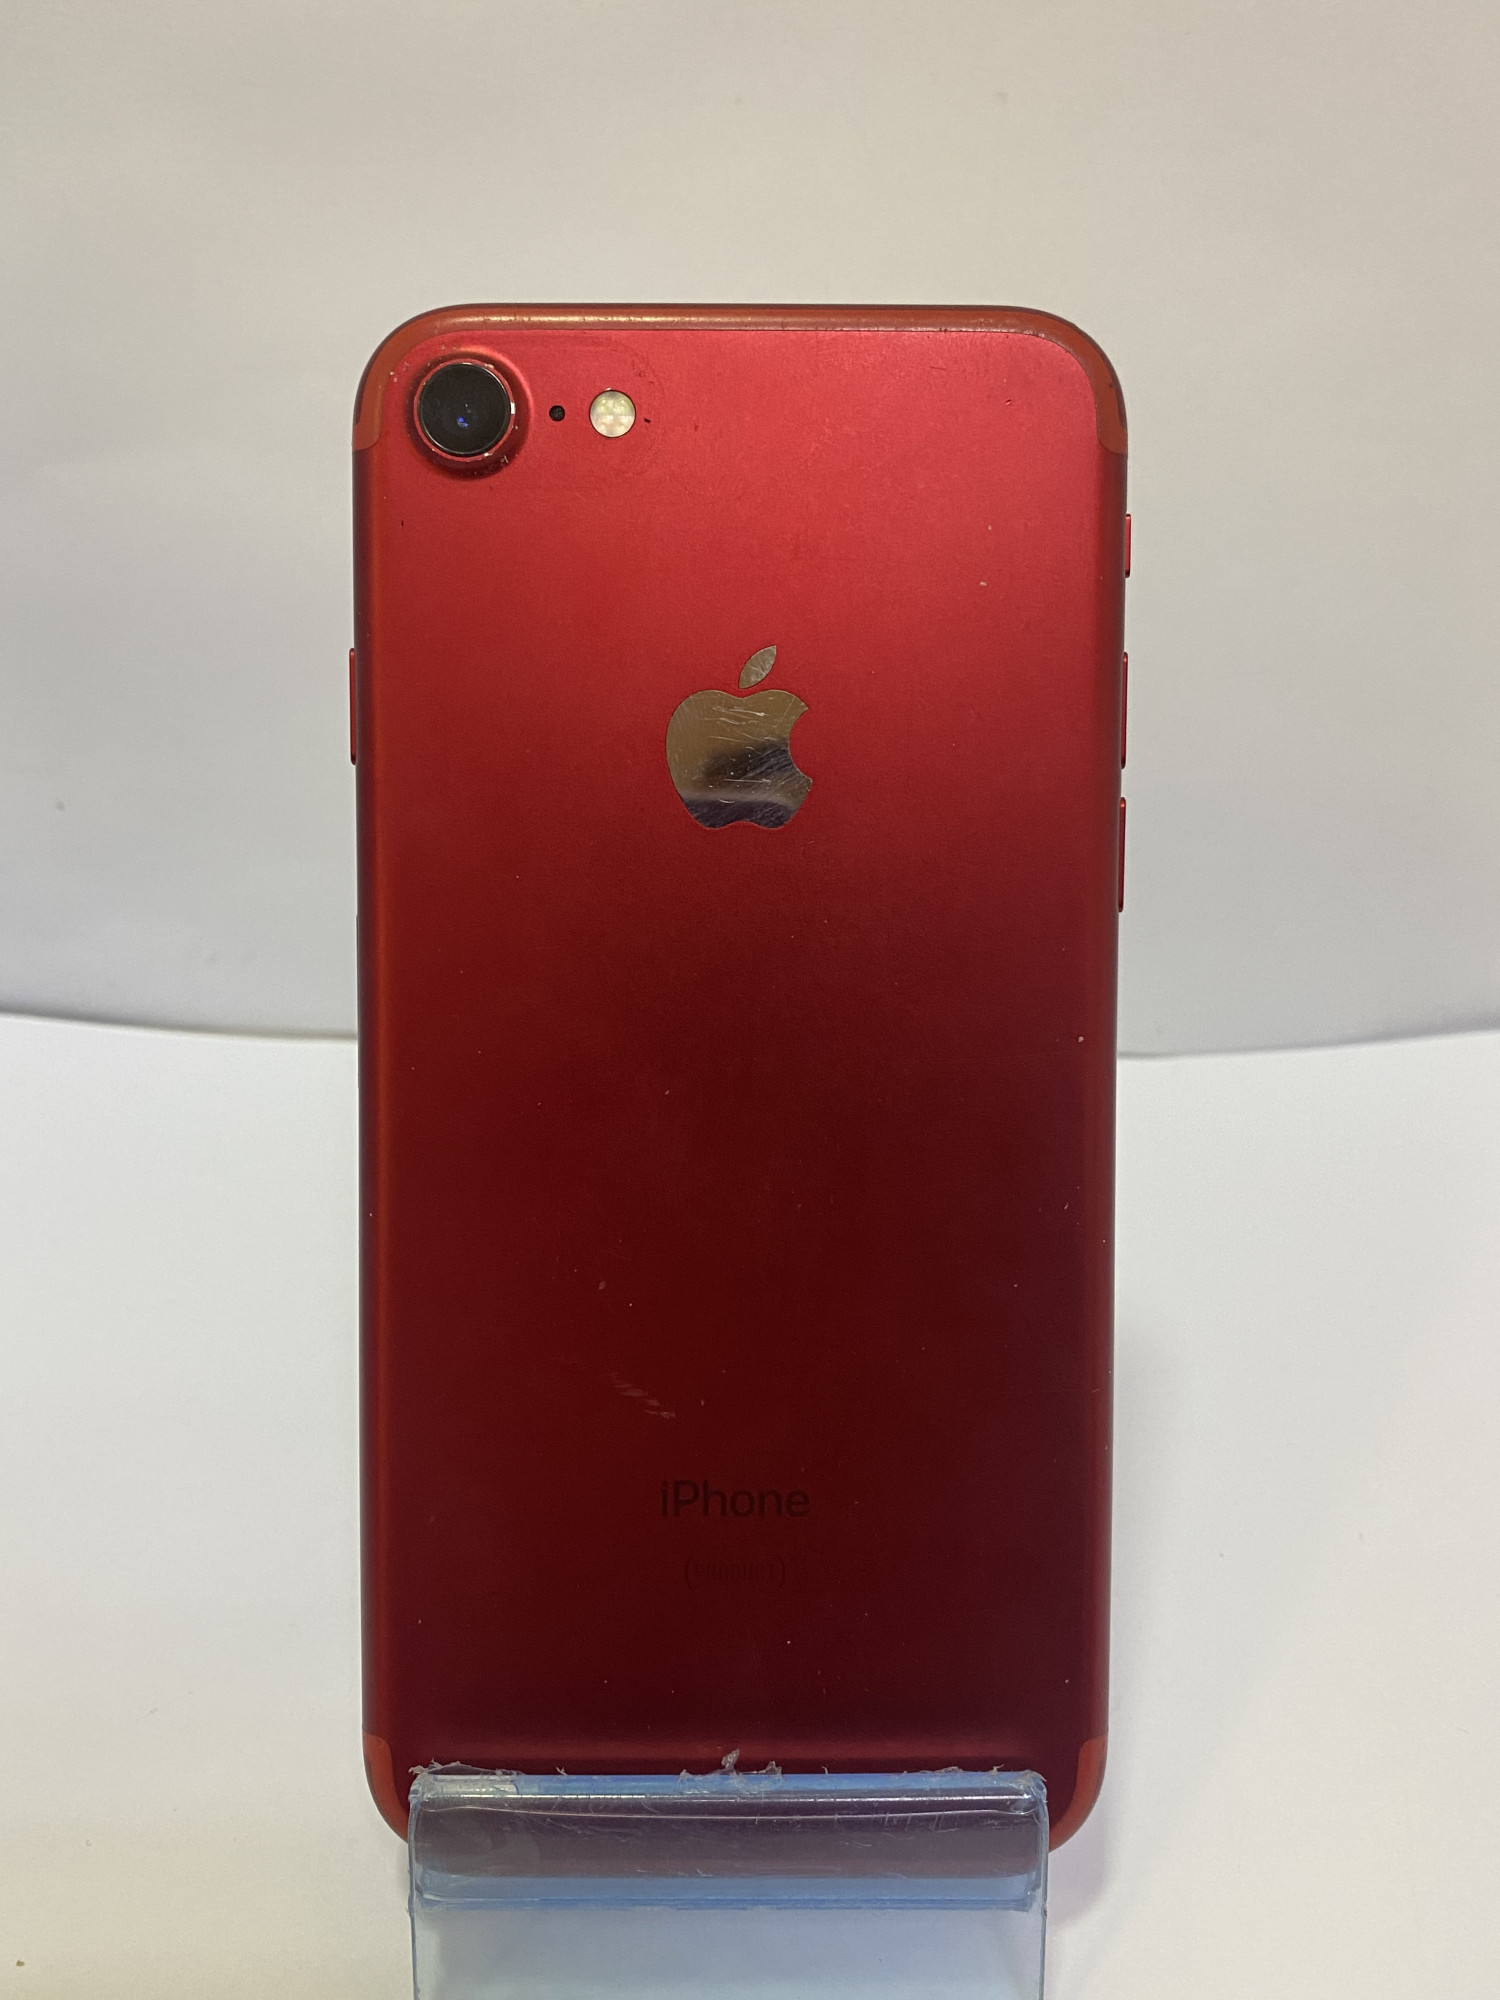 Apple iPhone 7 128Gb (Product) Red (MPRL2) 1